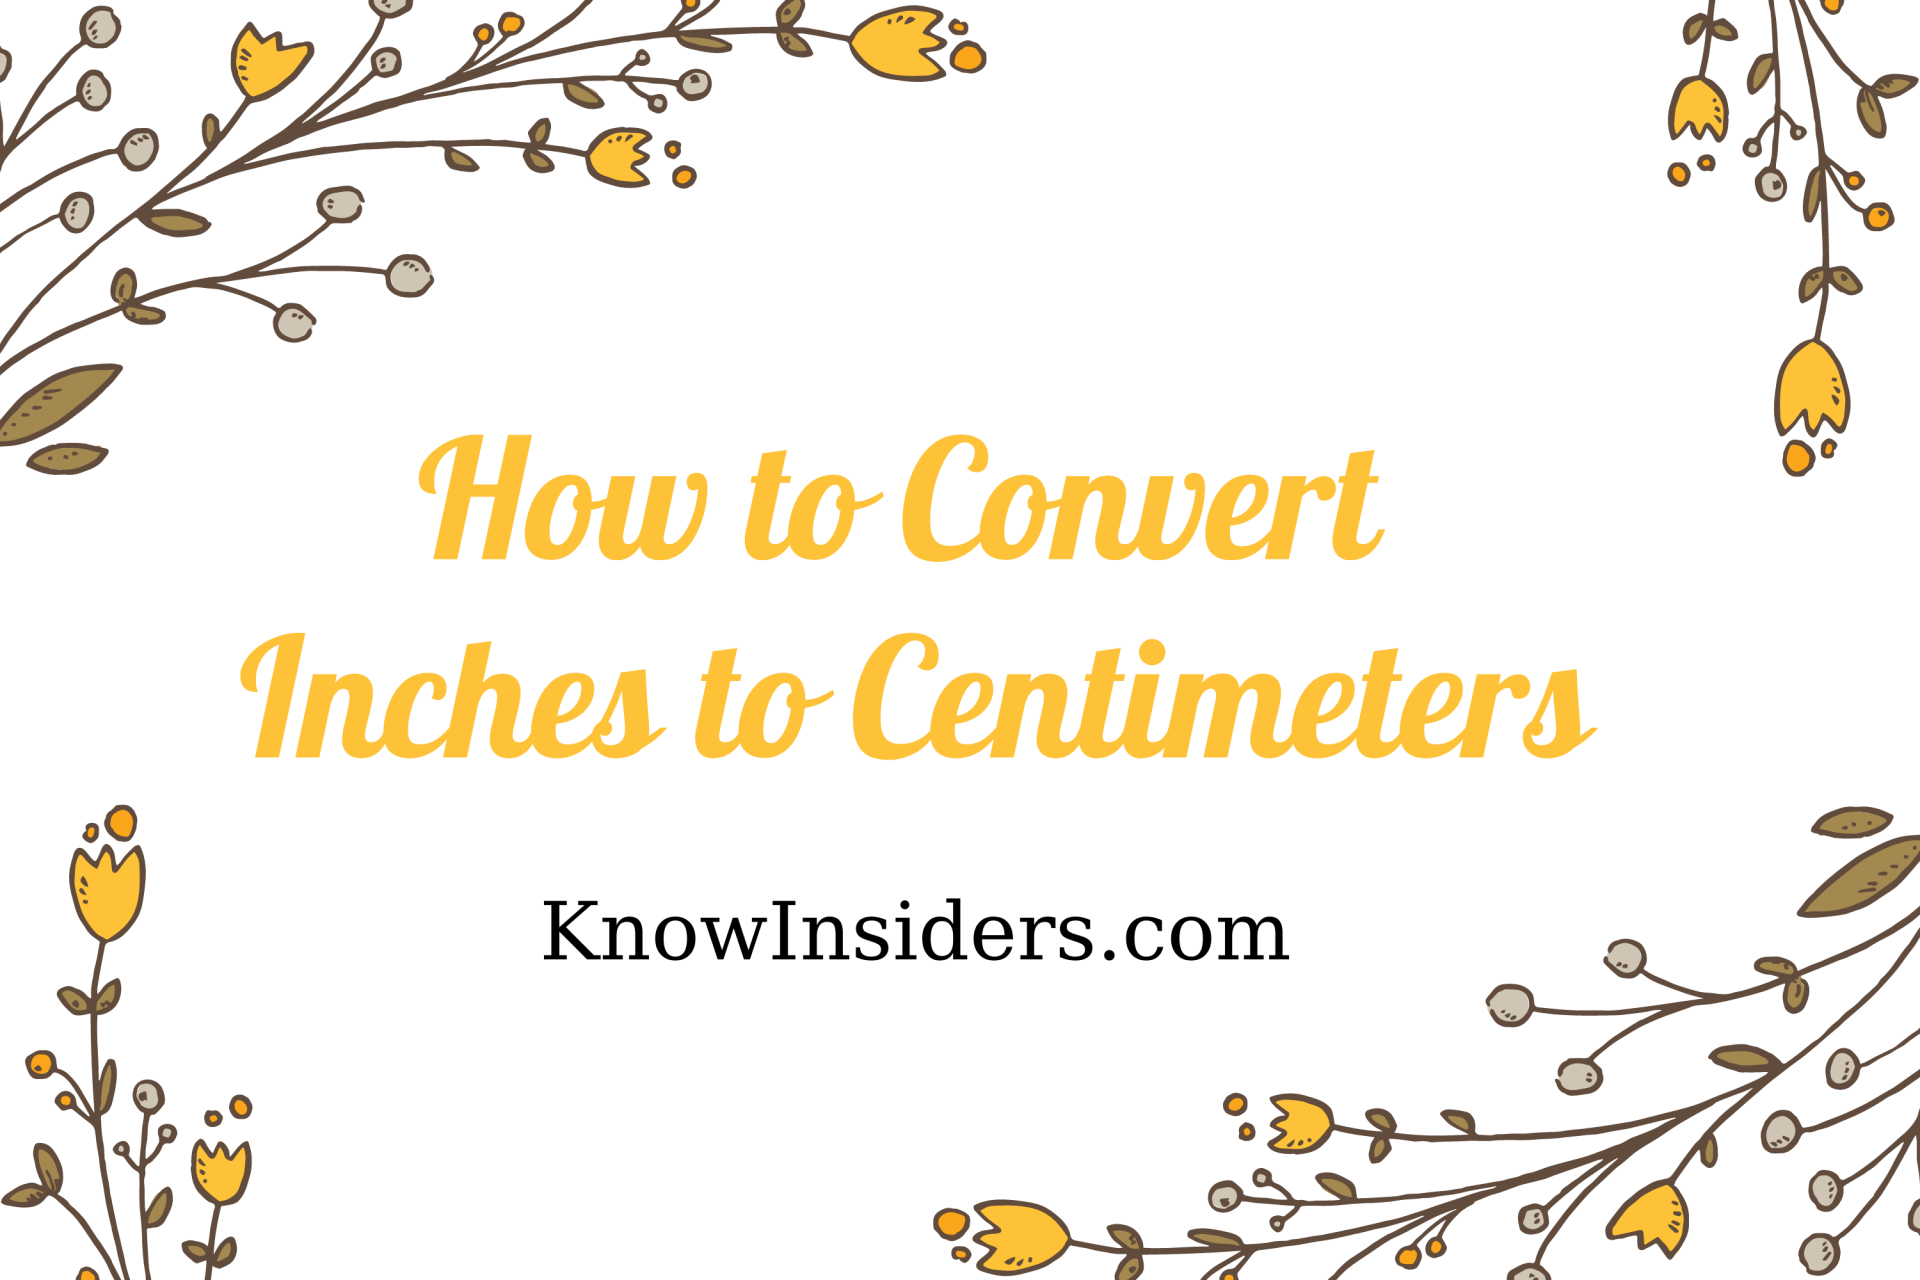 How to Convert Inches to Centimeters - Simple Steps